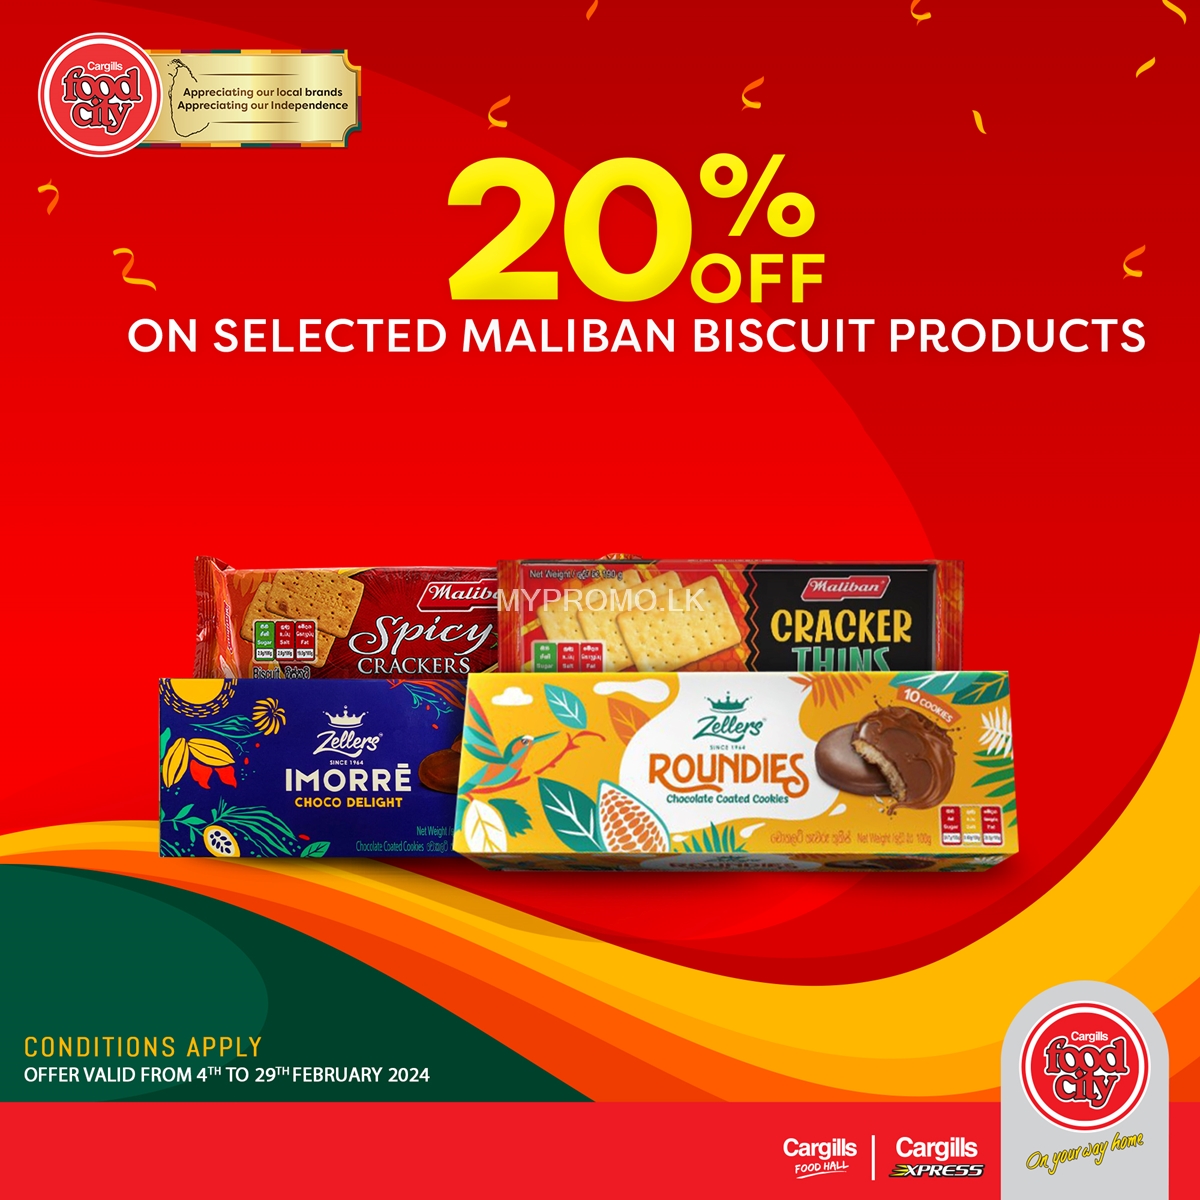 20% off on selected maliban Biscuit Products at Cargills Food City